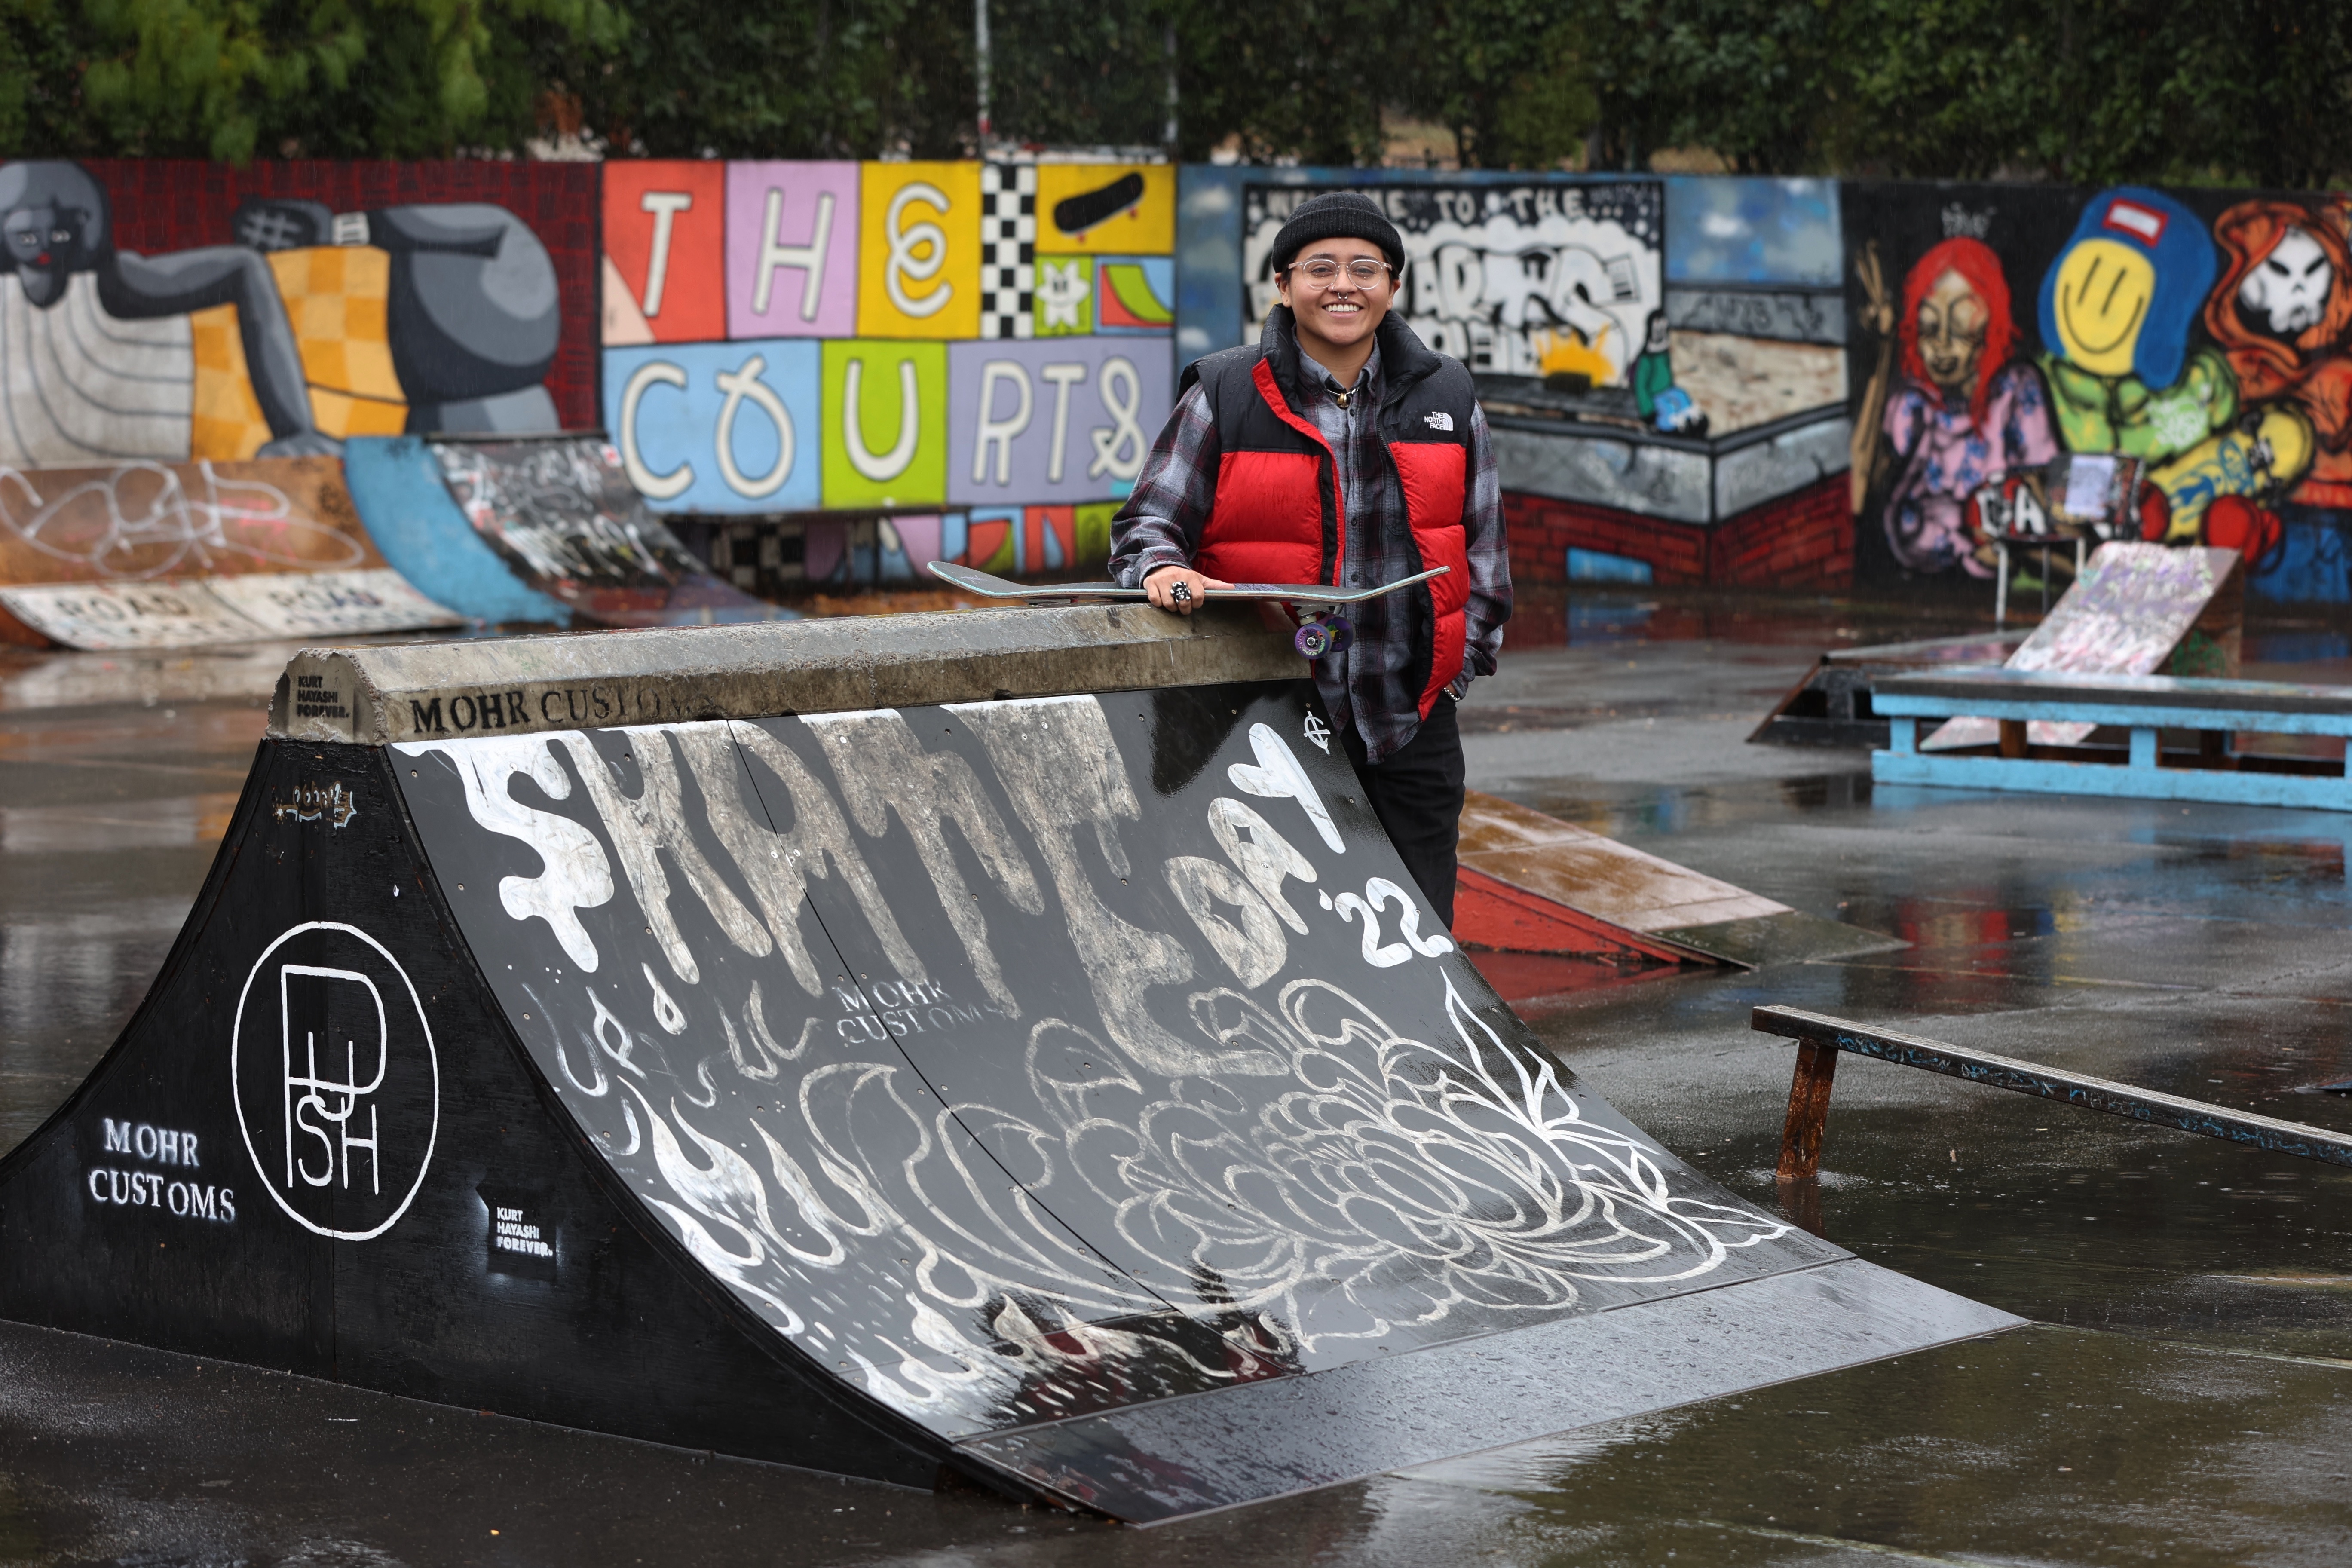 Sara Campos poses at tennis courts being converted to a skatepark